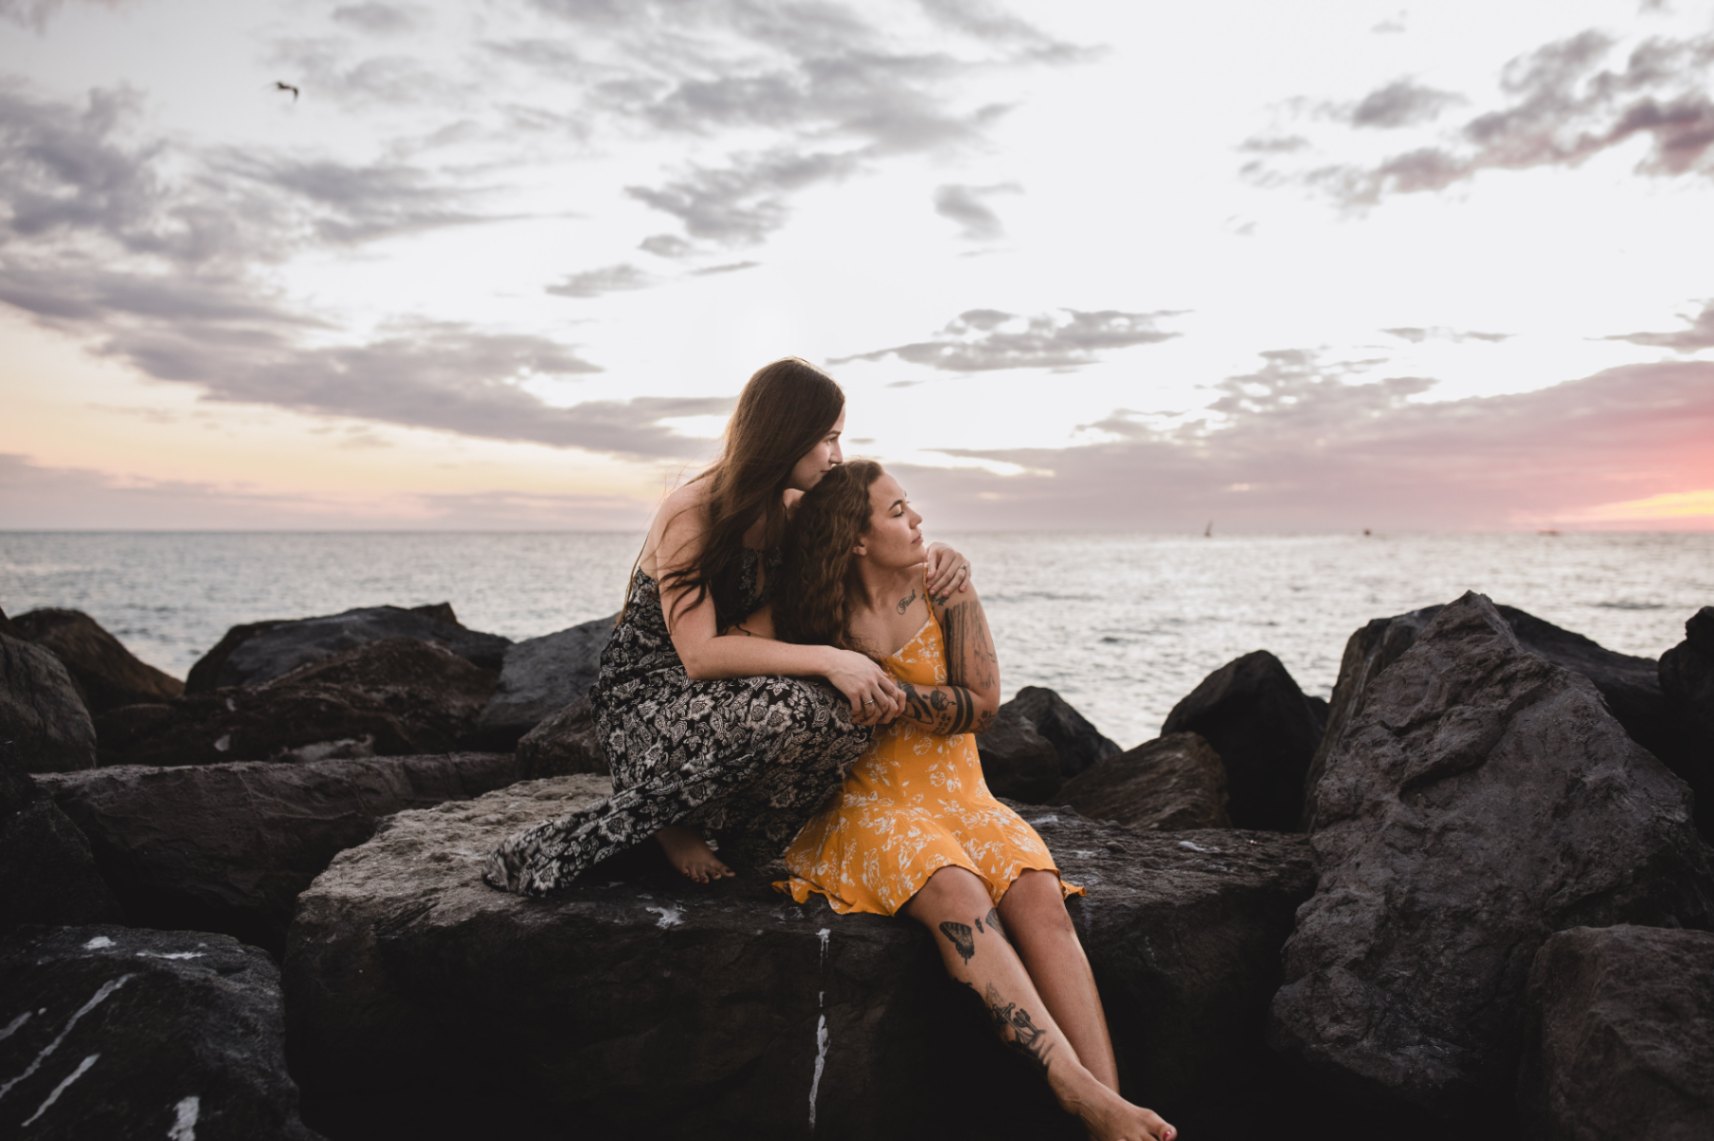 two women in love holding each other while sitting on beach rocks